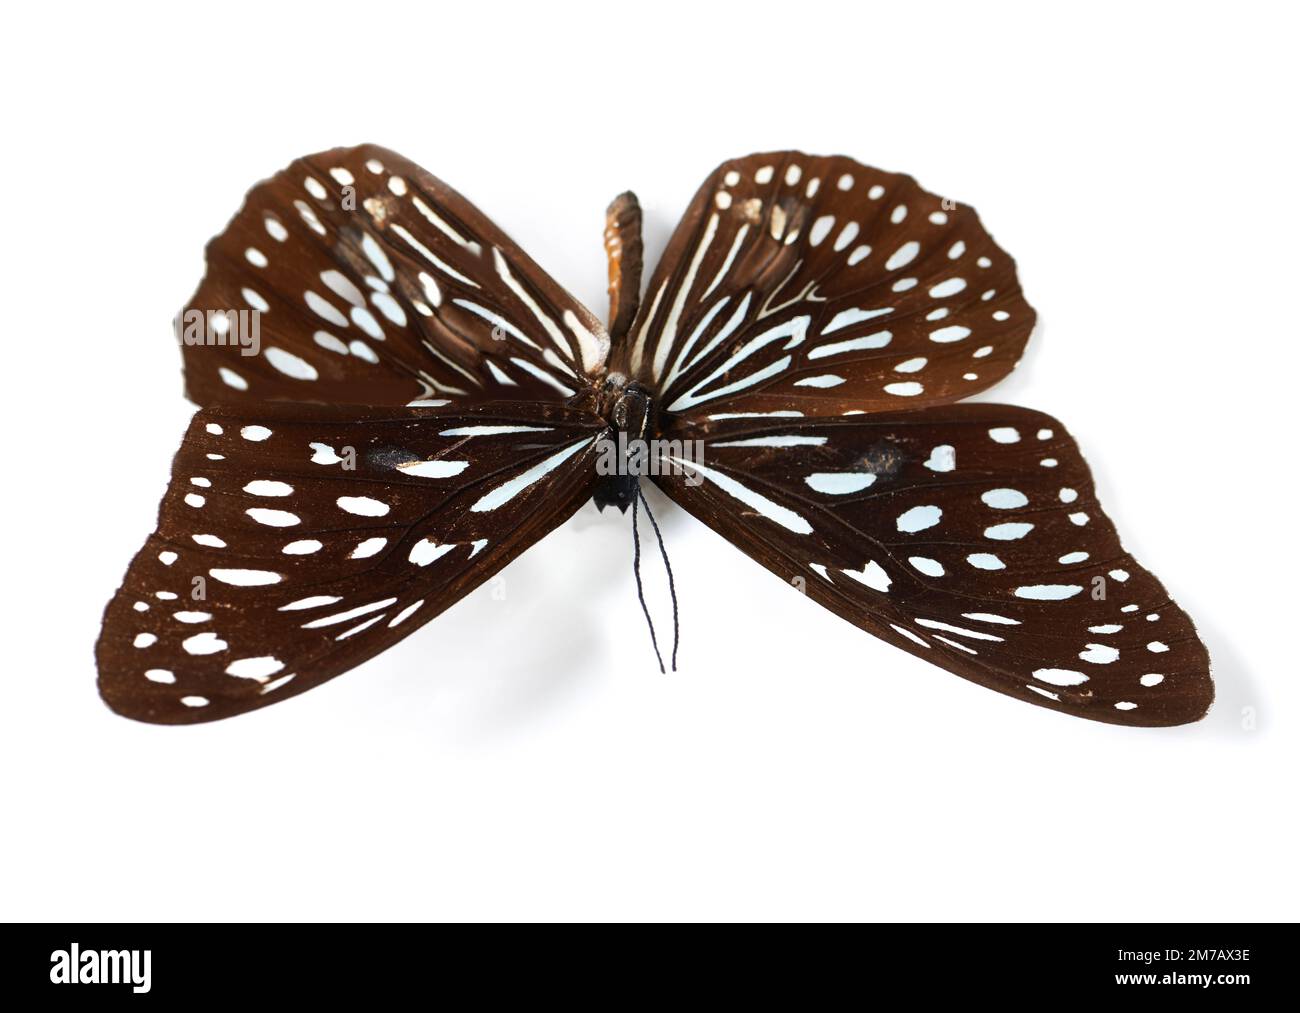 The fragile splendor of a butterfly. Studio shot of a butterfly with its wings spread out isolated on white. Stock Photo